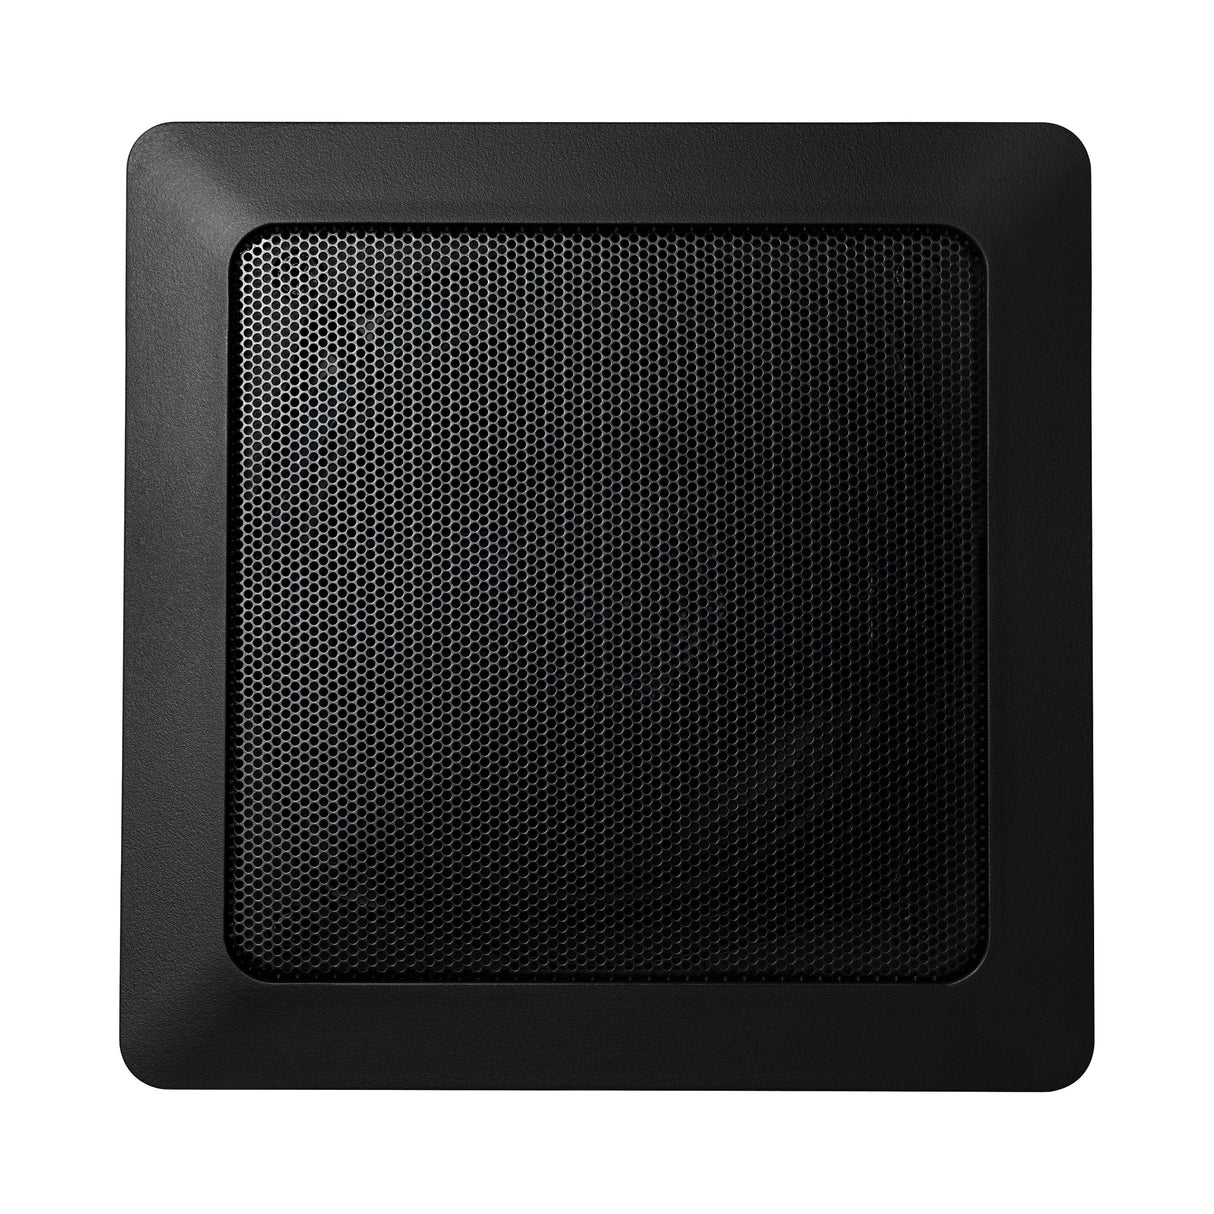 Mr. Steam | MusicTherapy® Square Audio Speakers With Powerful Bass